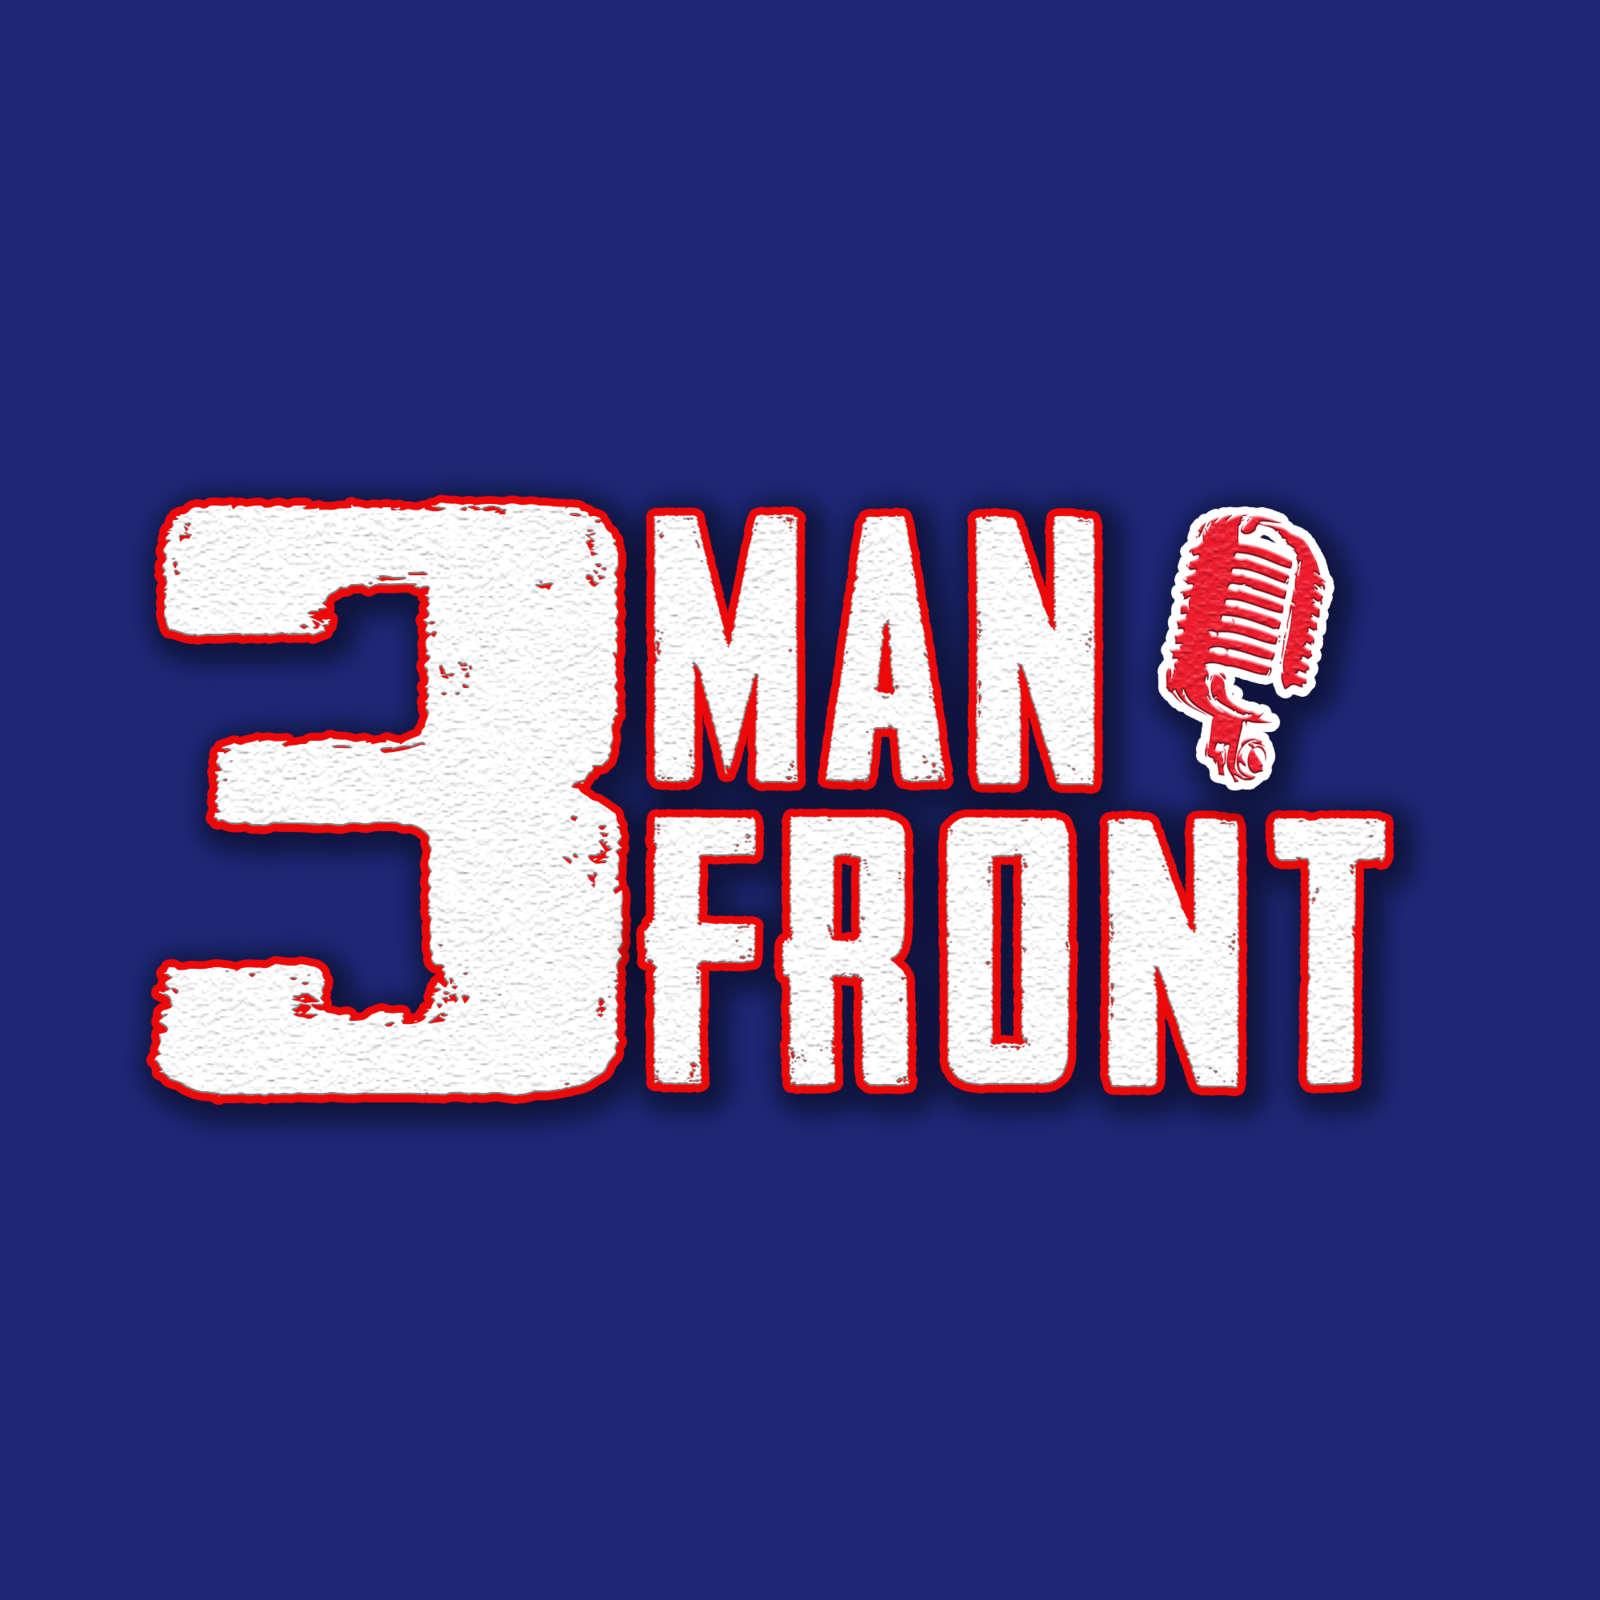 3 Man Front: Brian Edwards' NBA and CFB early lines!